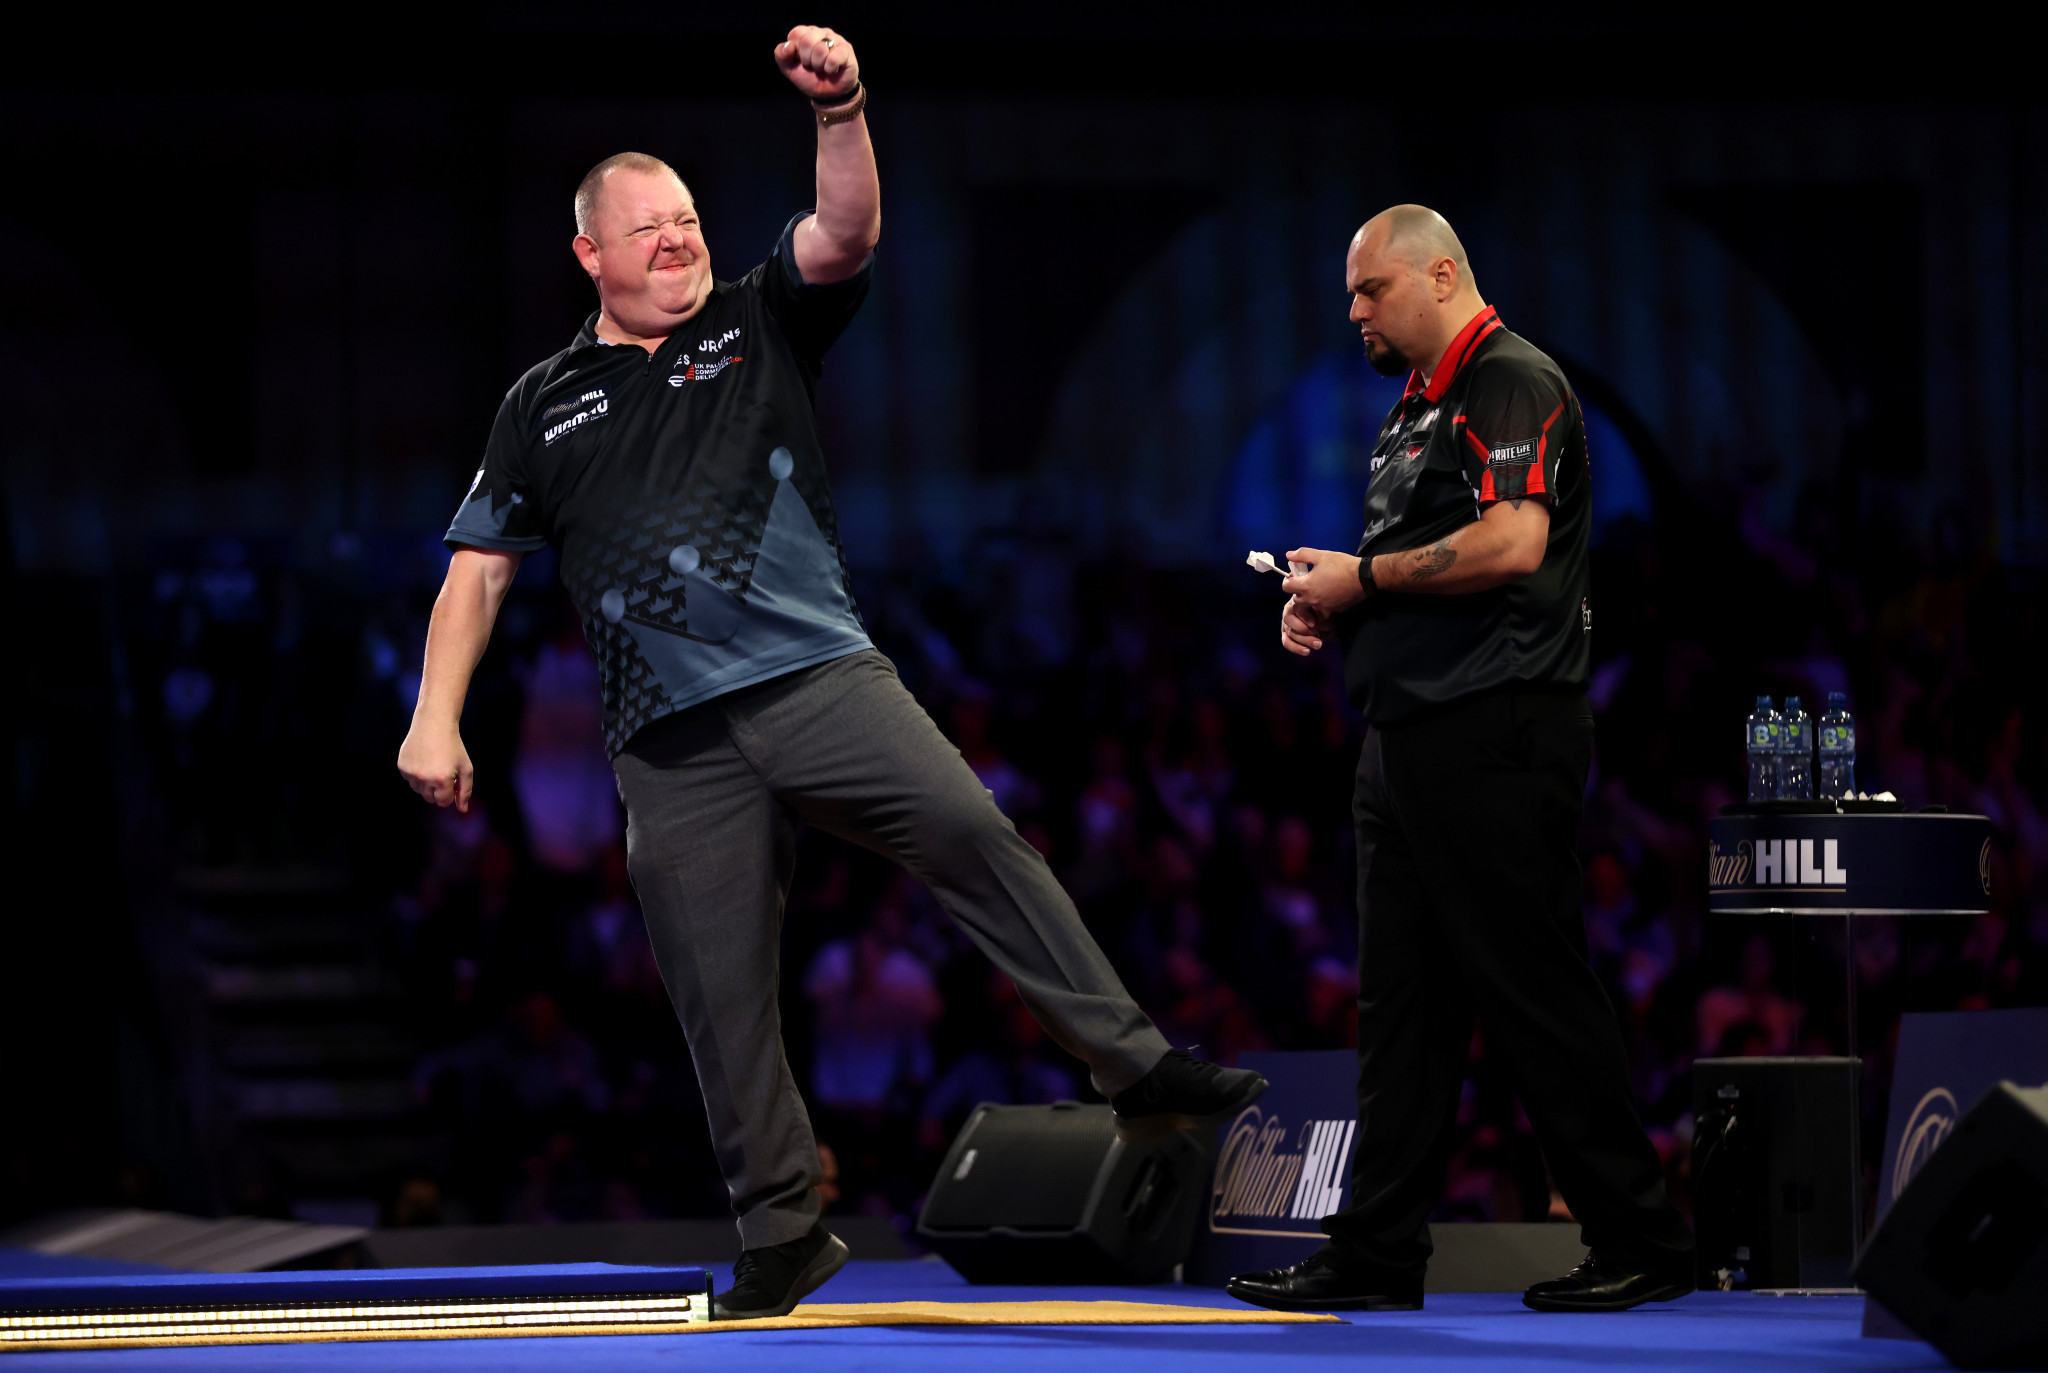 Mervyn King celebrates after coming back from the brink to defeat Raymond Smith at the PDC World Darts Championship ©Getty Images 